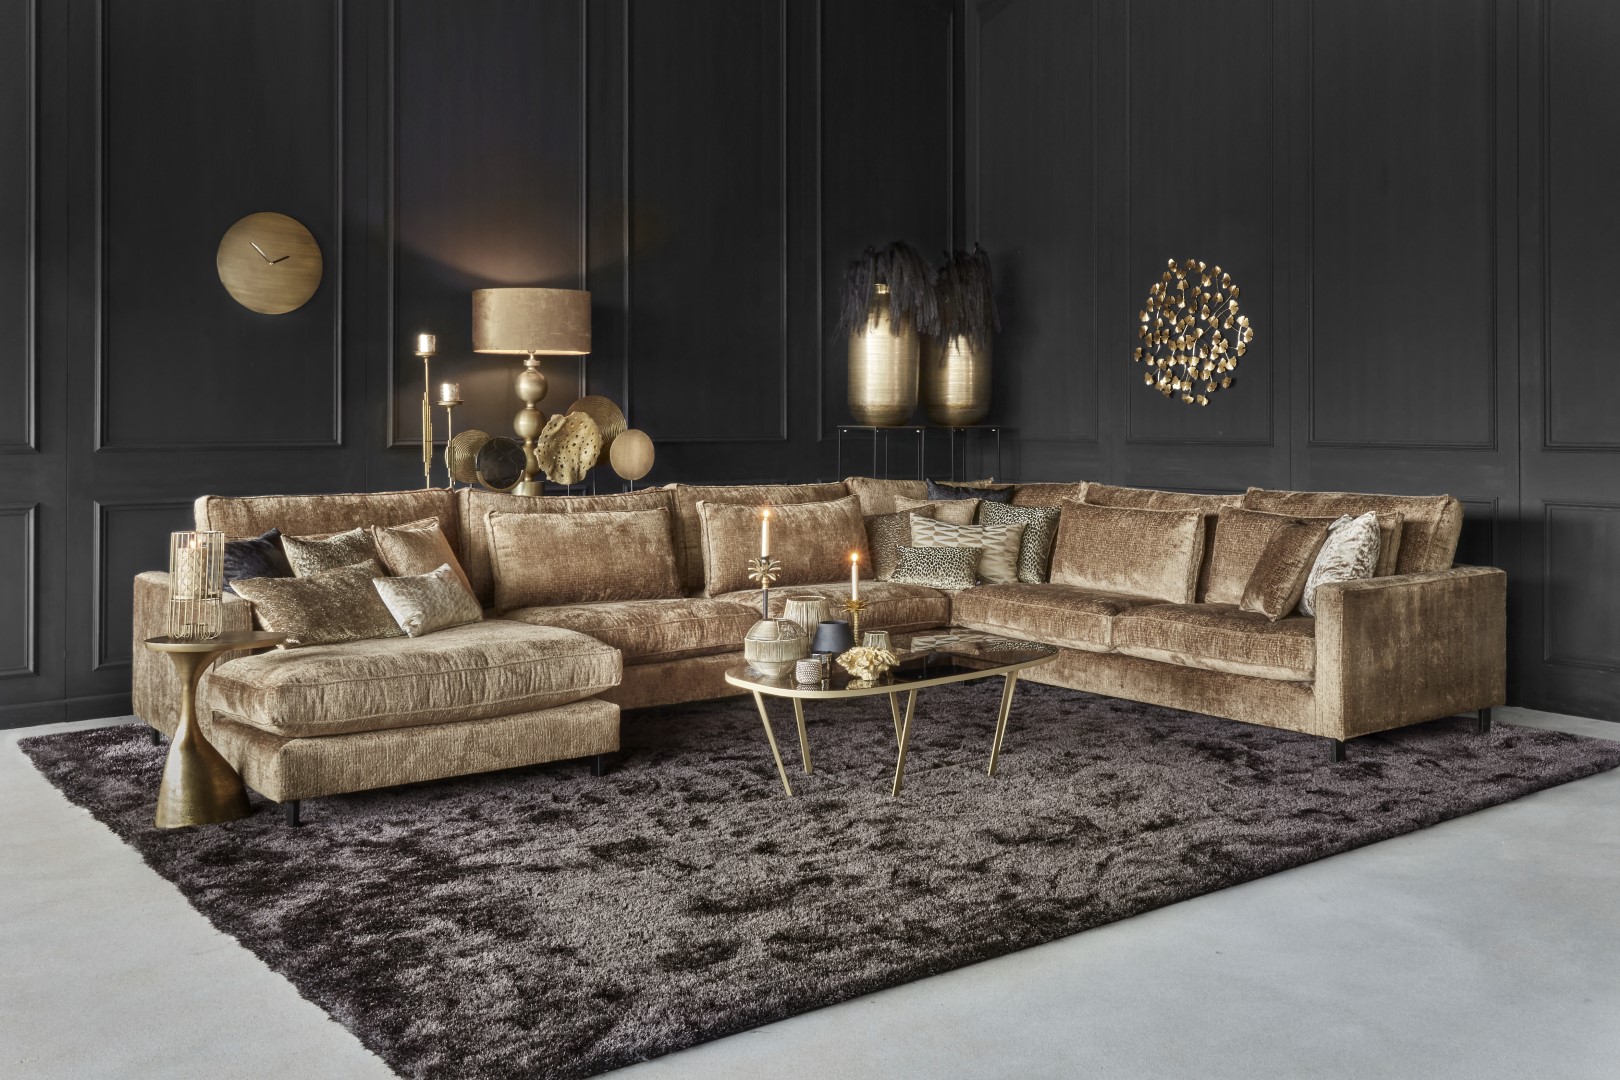 Gold colored living area with dark gray carpet